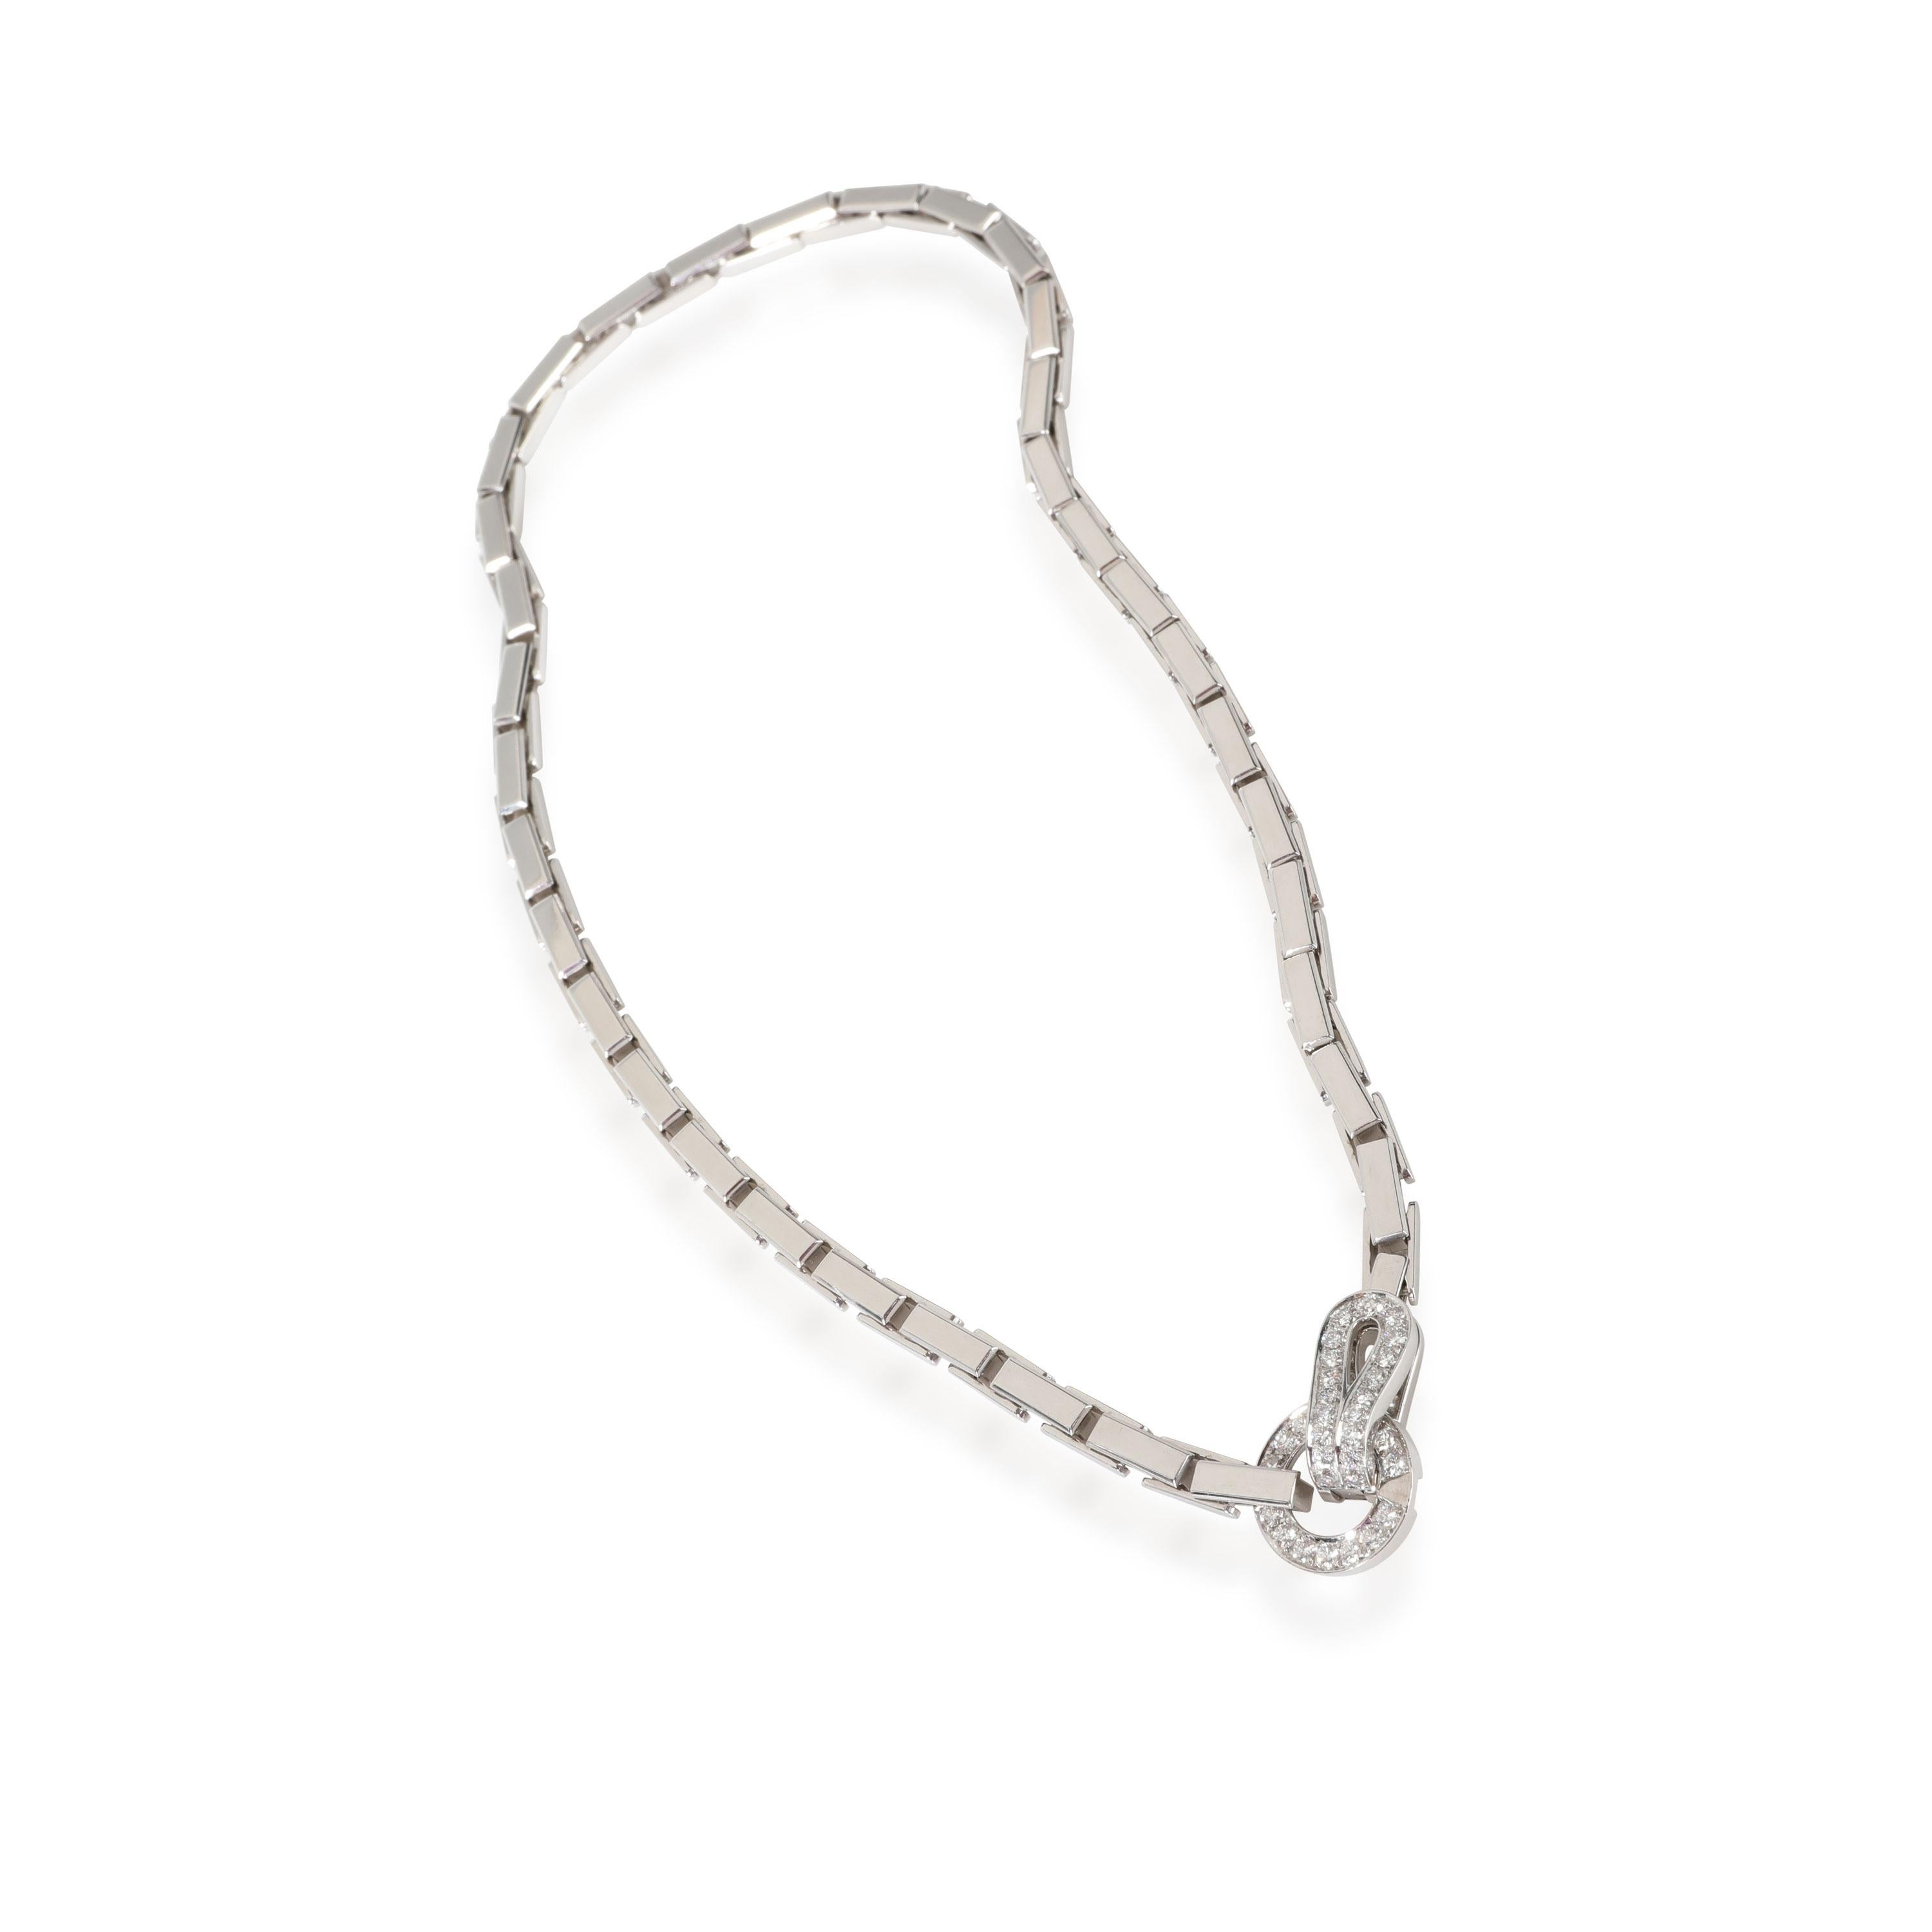 Cartier Agrafe Diamond Necklace in 18K White Gold 1.1 CTW
